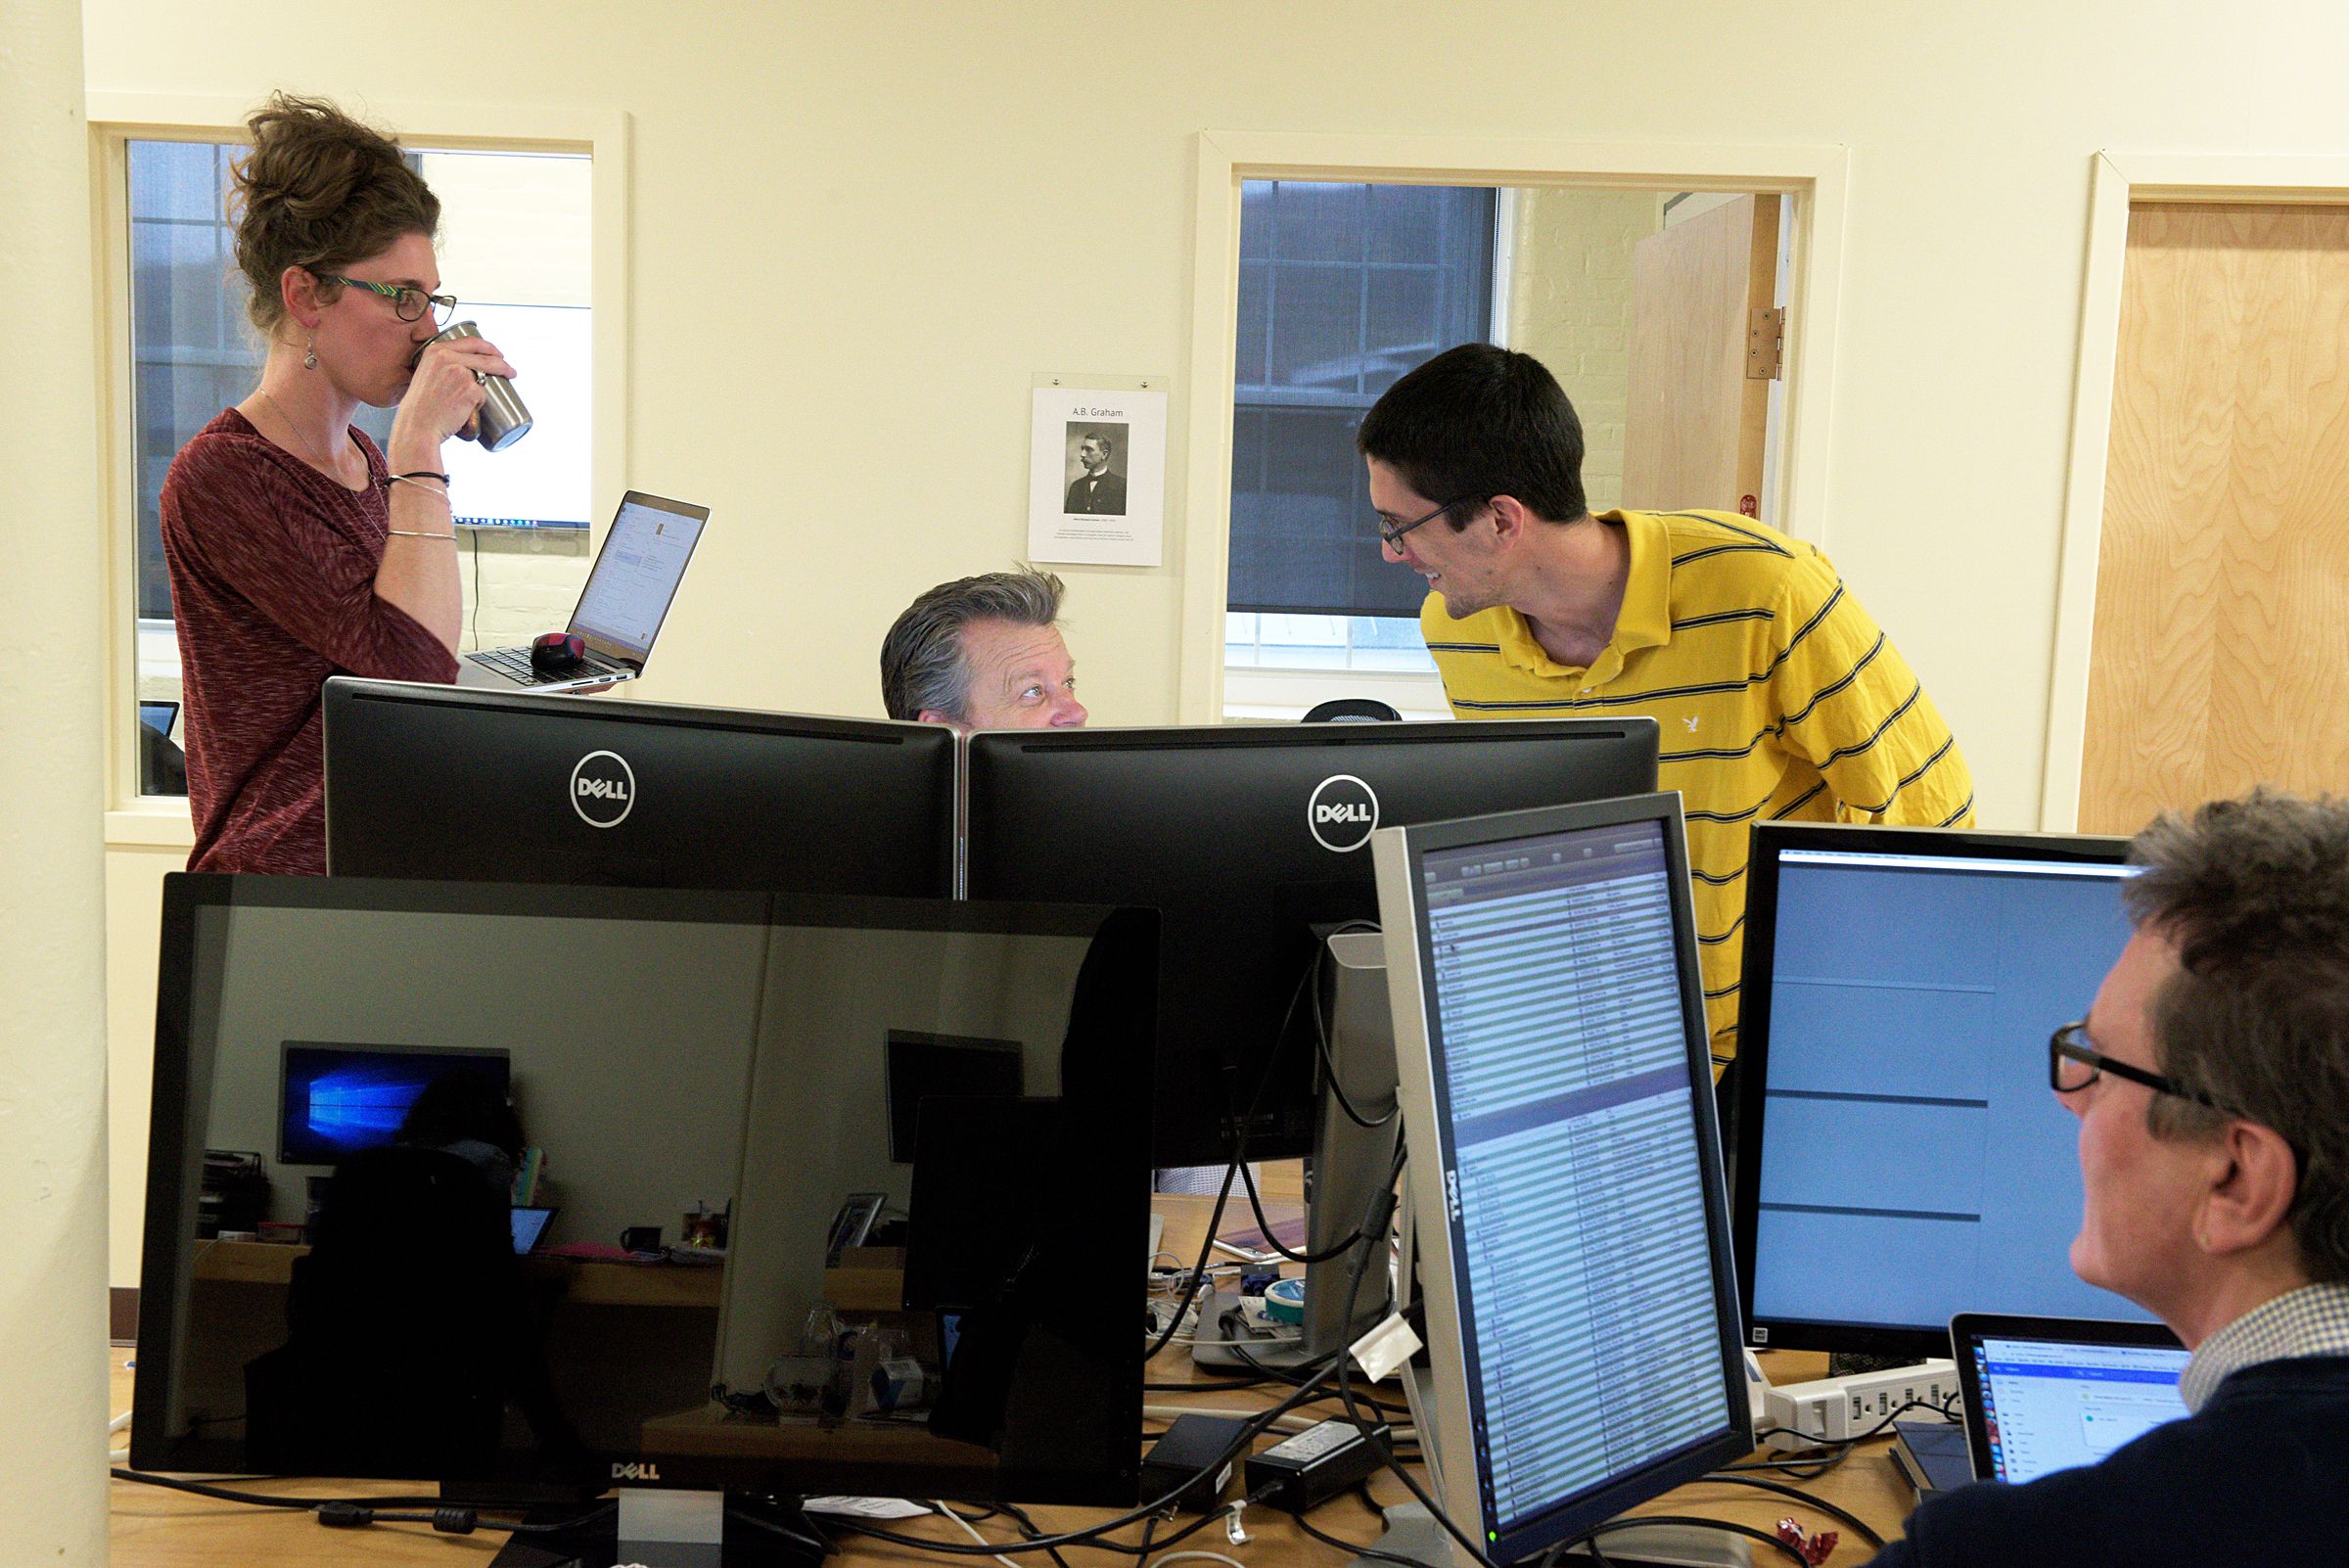 Product manager Josh Goodrich, back right, and account manager Alison Bowen, left, works with Vice President of Customer Success Mark Amdahl, middle, at Appcast in Lebanon, N.H., Thursday, October 27, 2016. Chief Scientist Mark Florence is at foreground right. (Valley News - James M. Patterson) Copyright Valley News. May not be reprinted or used online without permission. Send requests to permission@vnews.com.